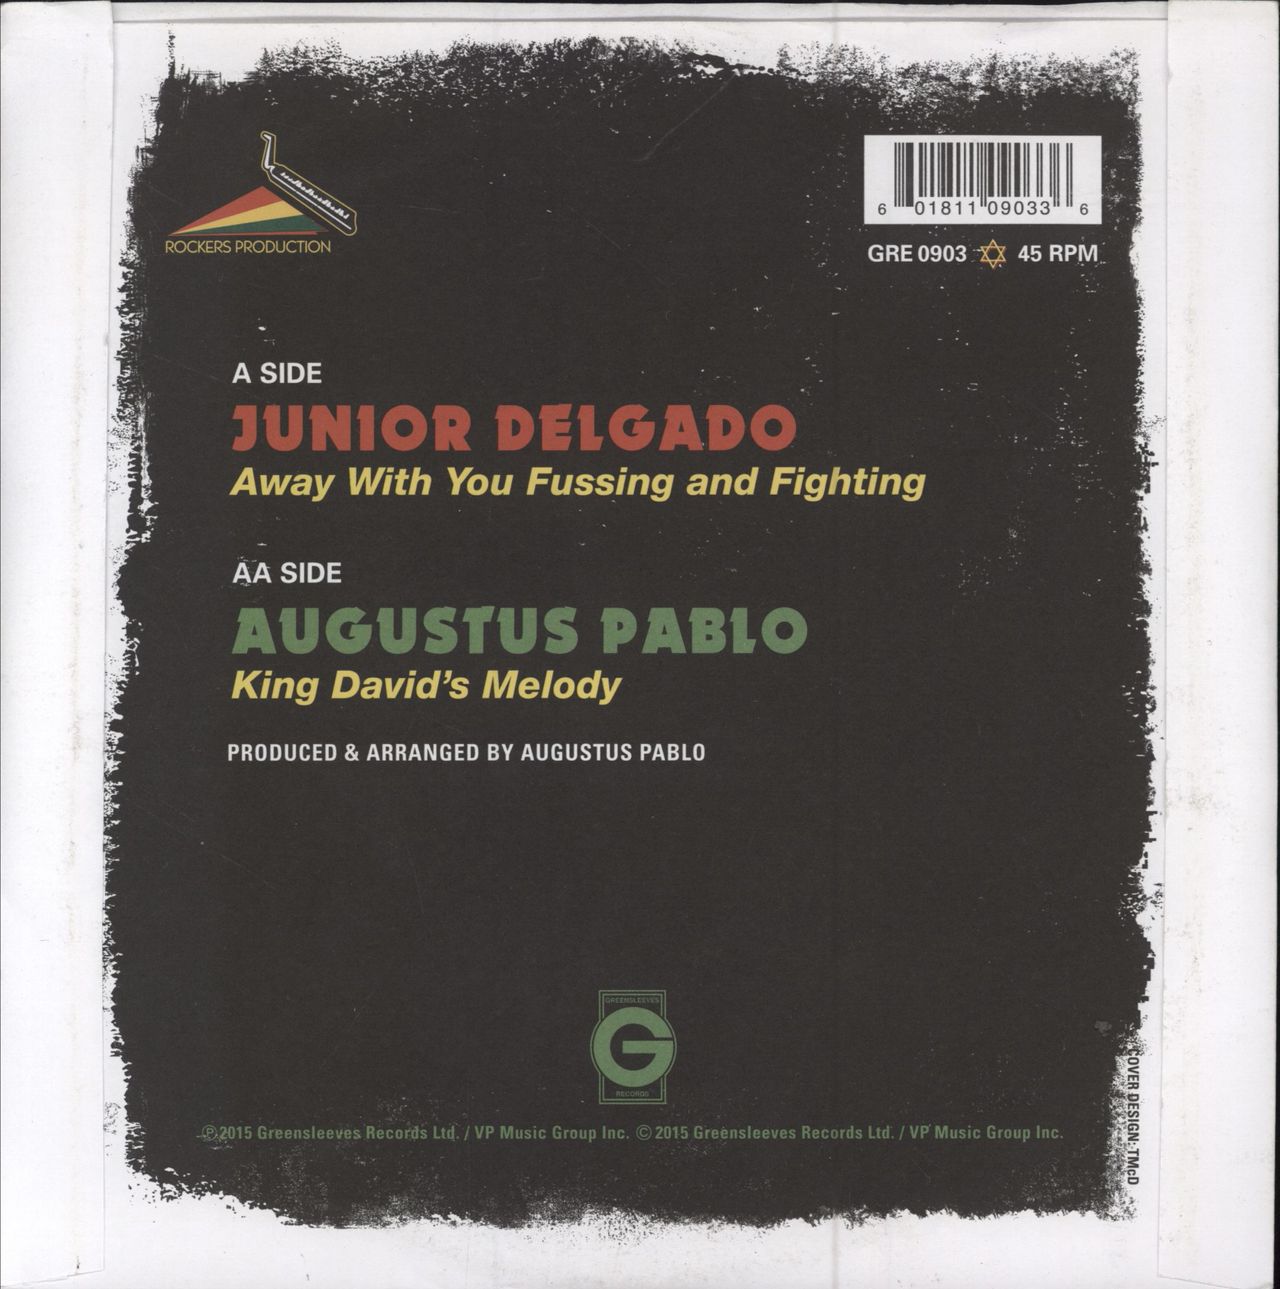 Junior Delgado Away With You Fussing And Fighting / King David's Melody UK 7" vinyl single (7 inch record / 45) 601811090336